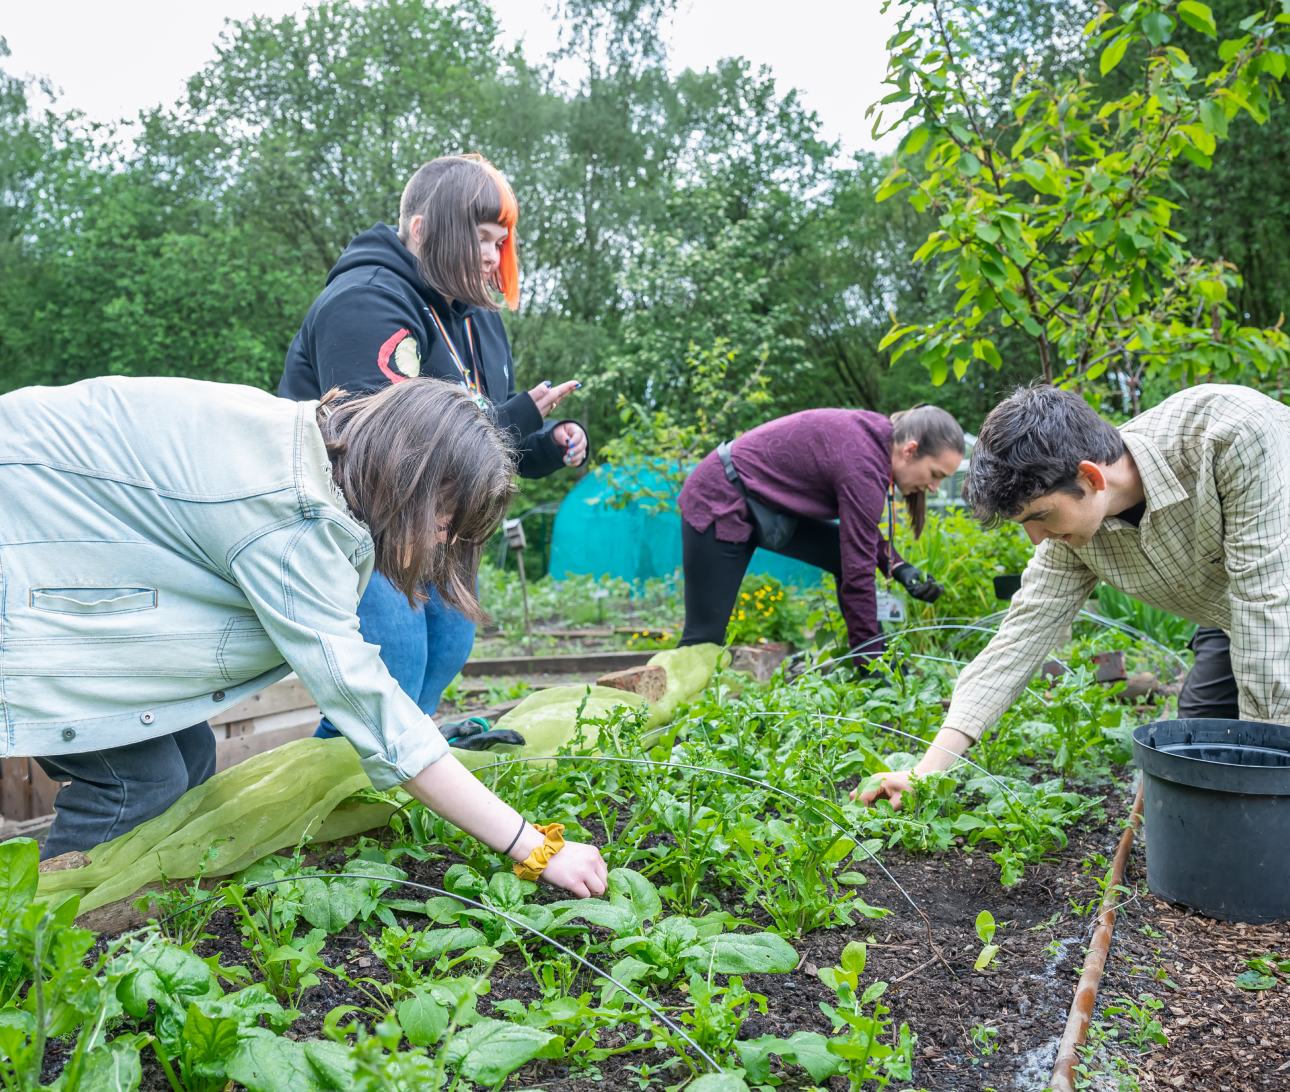 Group of people crouched and bending down tending to vegetable beds in the allotment